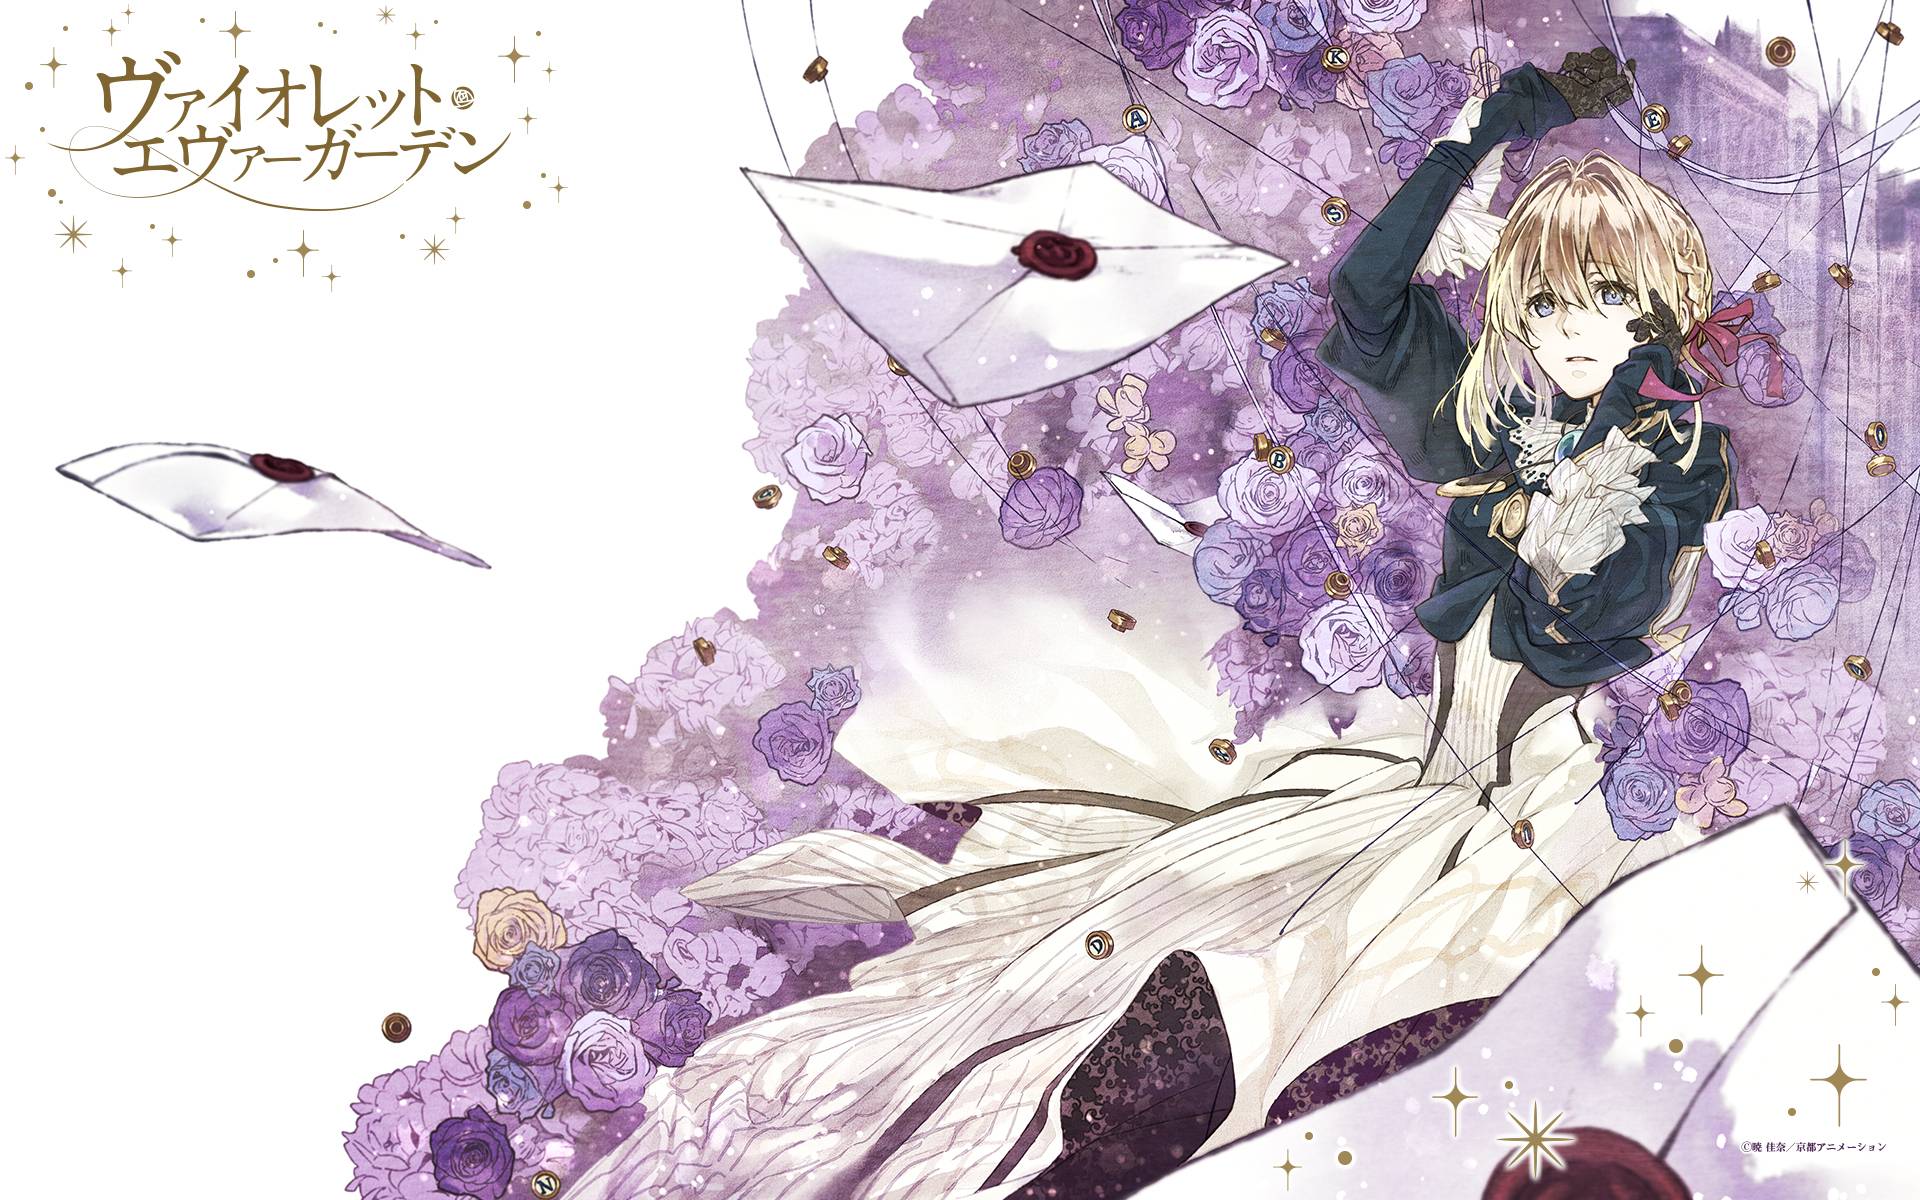 Anime Violet Evergarden Wallpapers Top Free Anime Violet Evergarden Backgrounds Wallpaperaccess